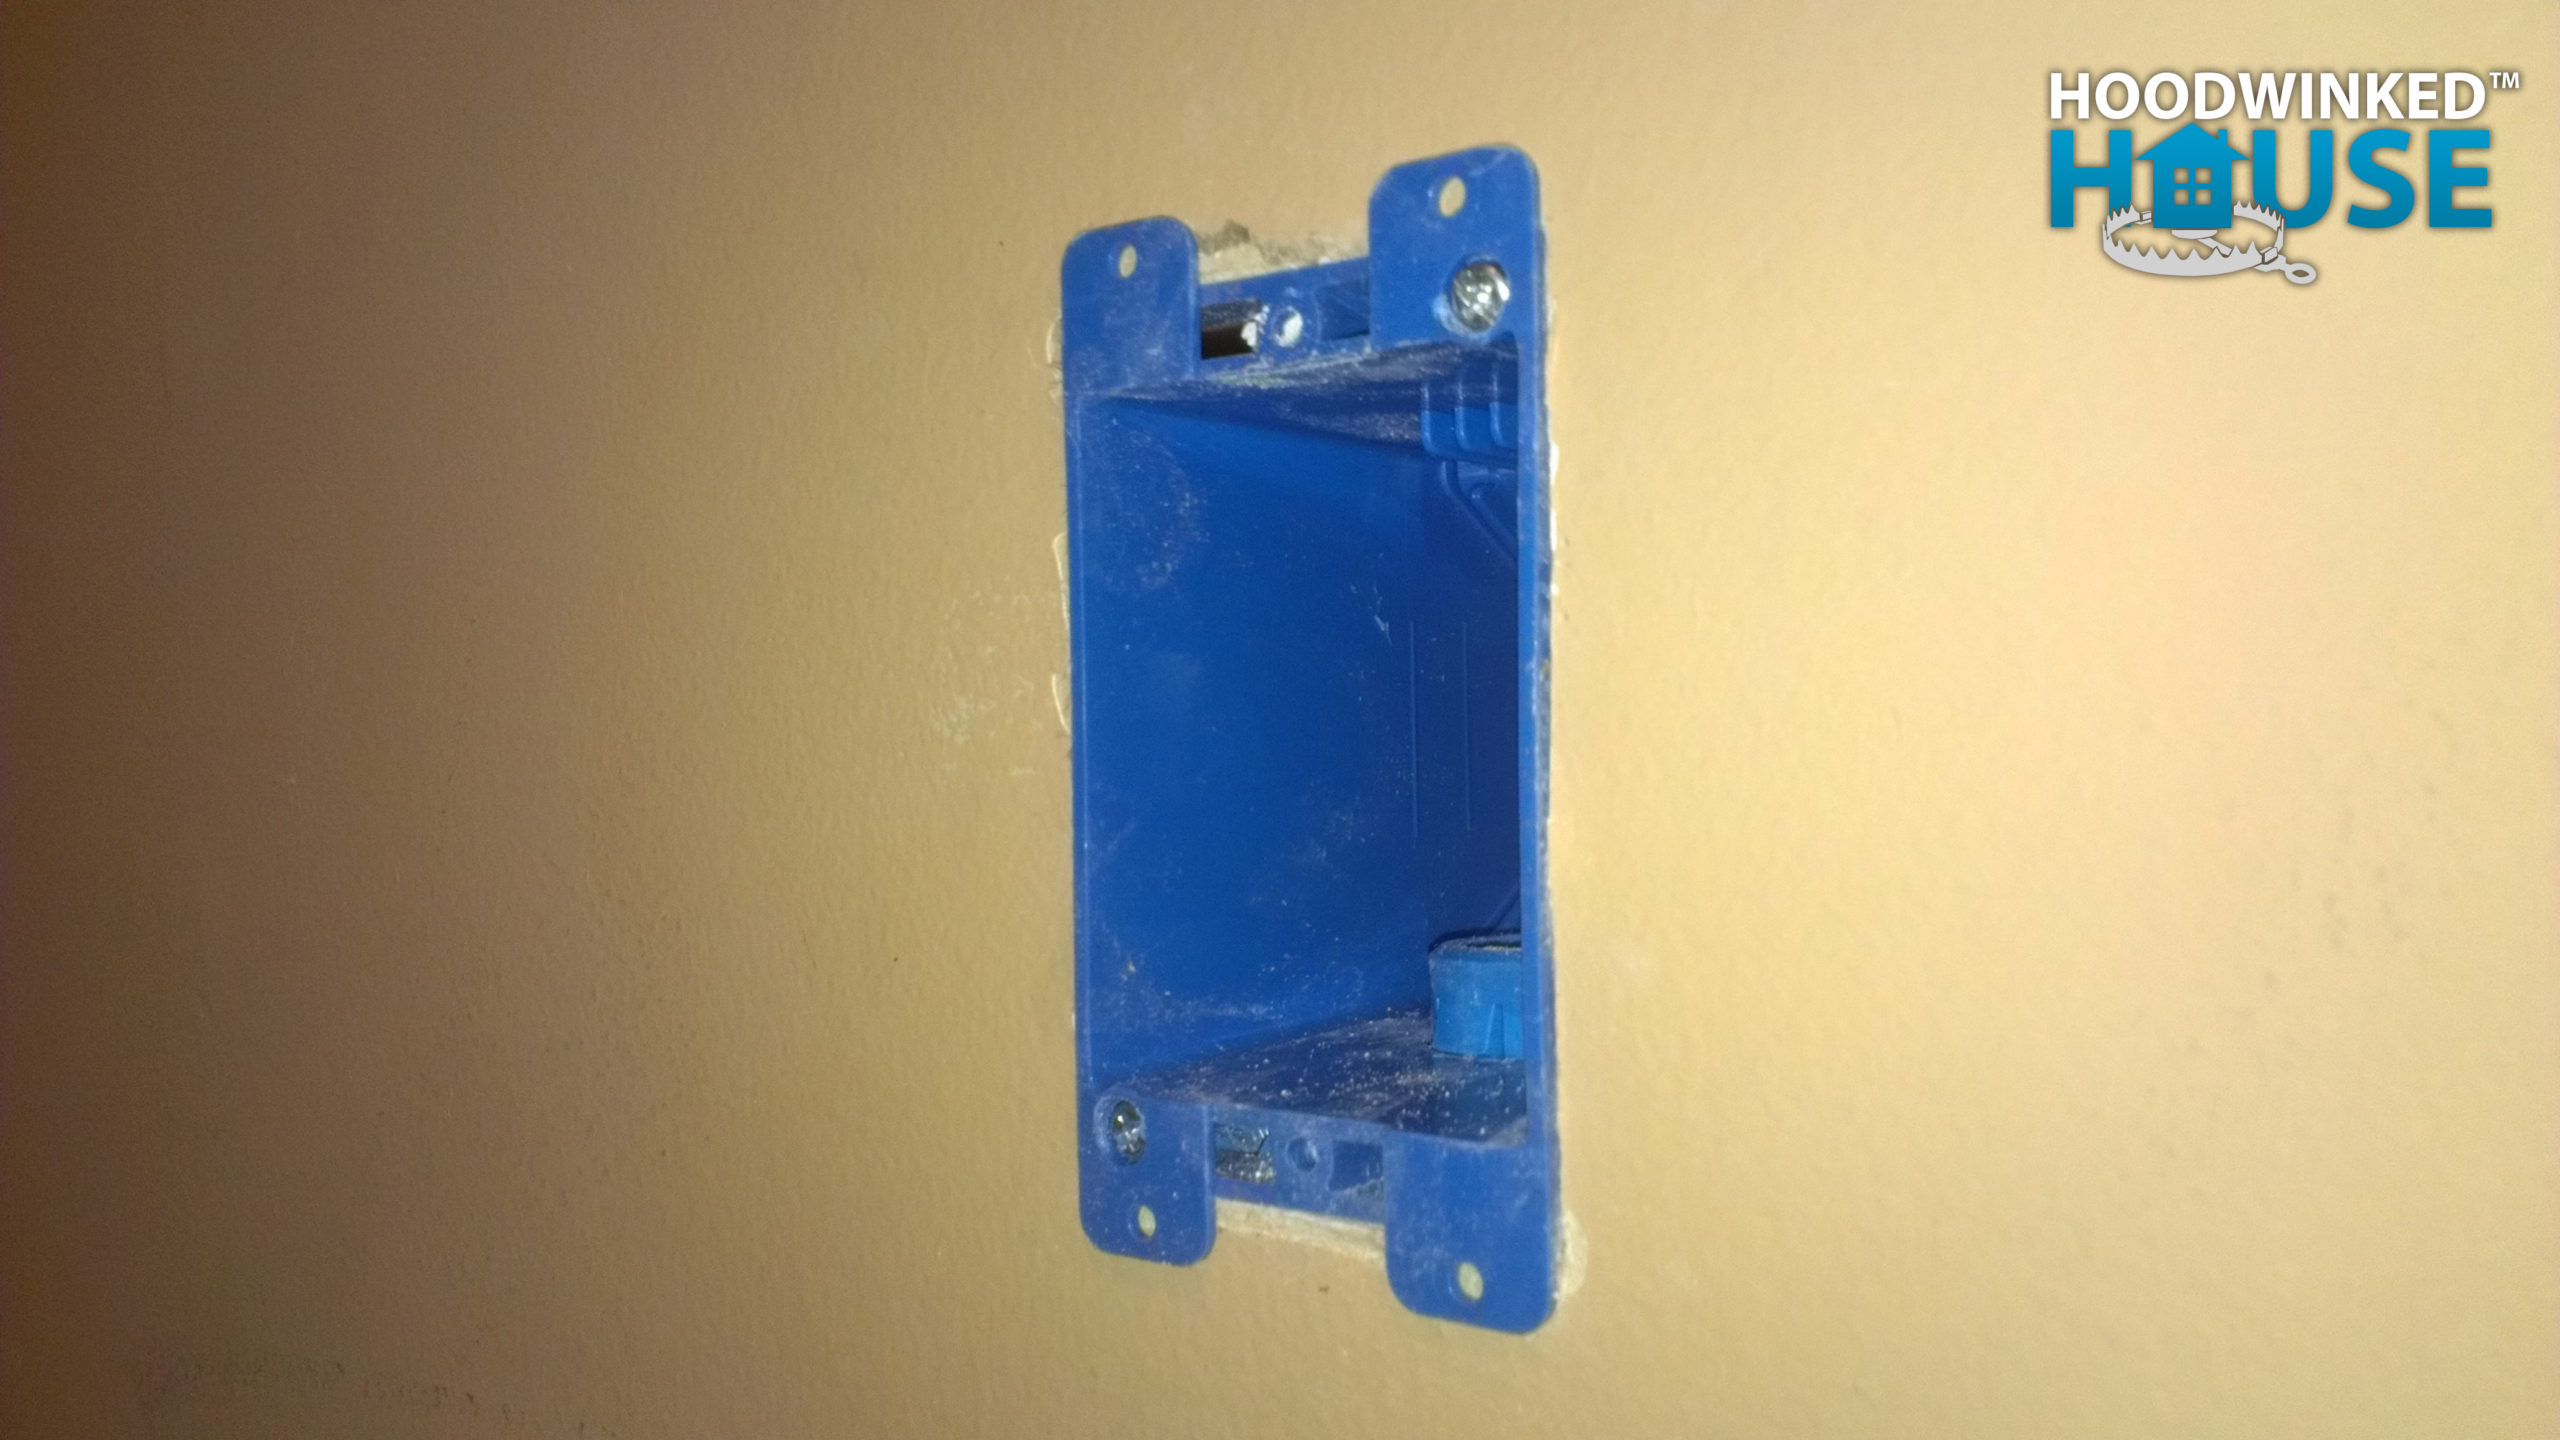 A blue old work junction box is installed in drywall. It has been modified to include a PVC conduit connector.